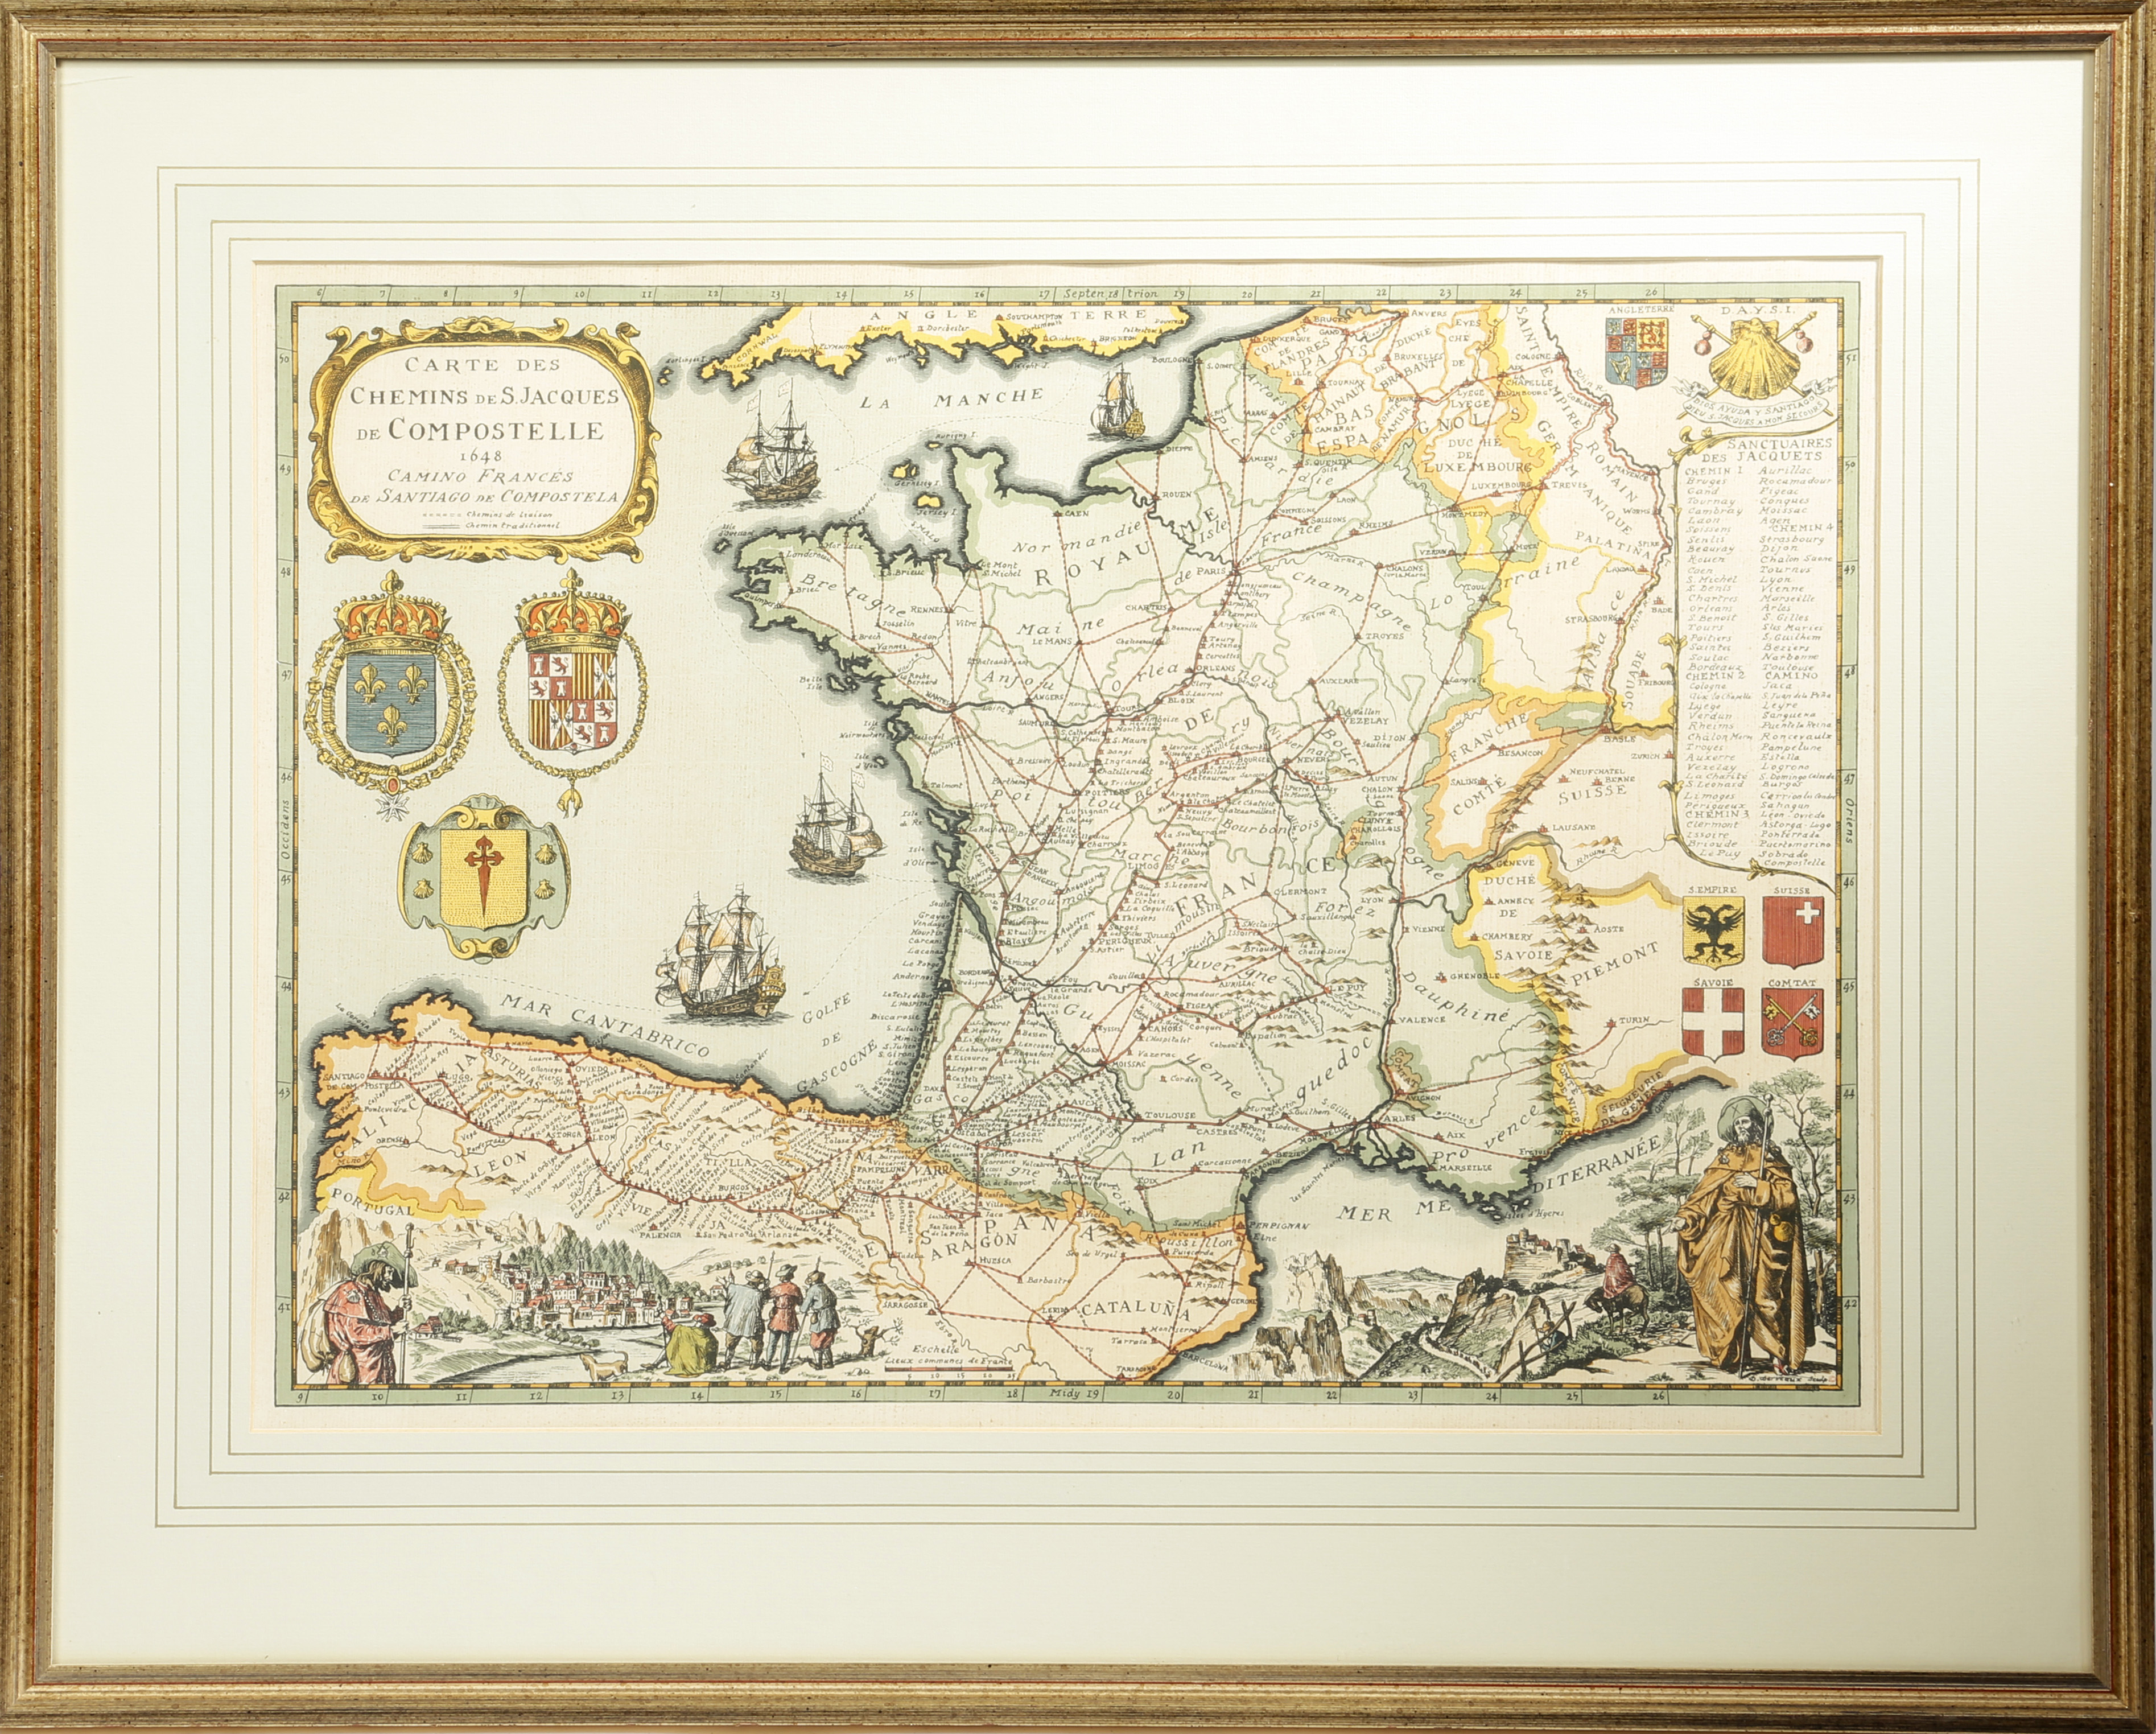 A MODERN MAP OF THE 'CAMINO DE SANTIAGO' IN 17TH CENTURY STYLE BY DANIEL DERVEAUX (FRENCH D.2010),